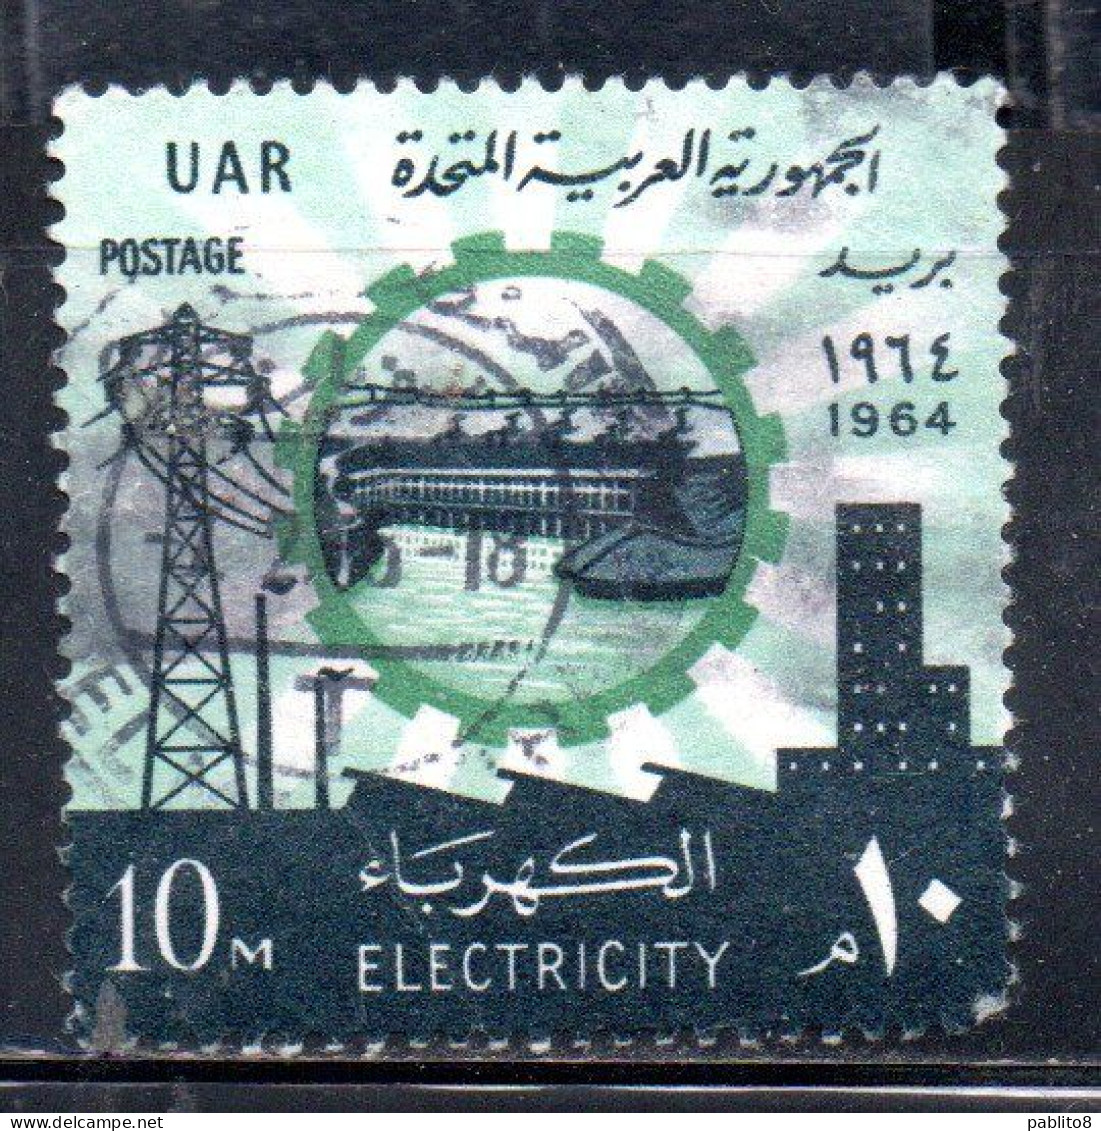 UAR EGYPT EGITTO 1964 ELECTRICITY ASWAN HIGH DAM HYDROELICTRIC POWER STATION LAND RECLAMATION 10m USED USATO - Usados